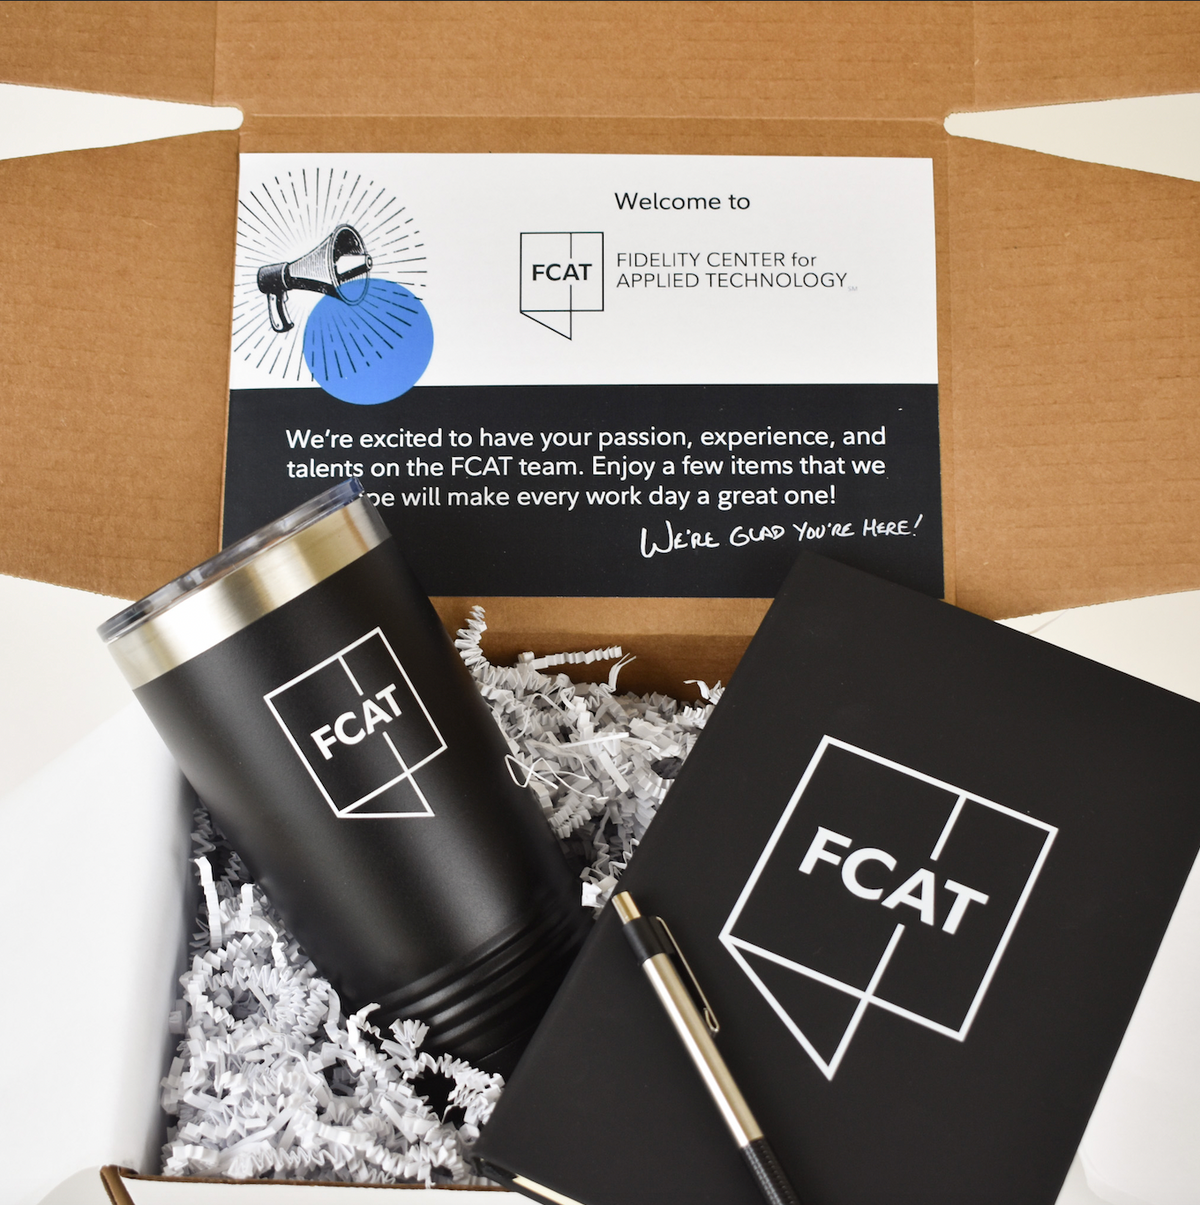 Corporate Gifting – Employee & Client Gifts